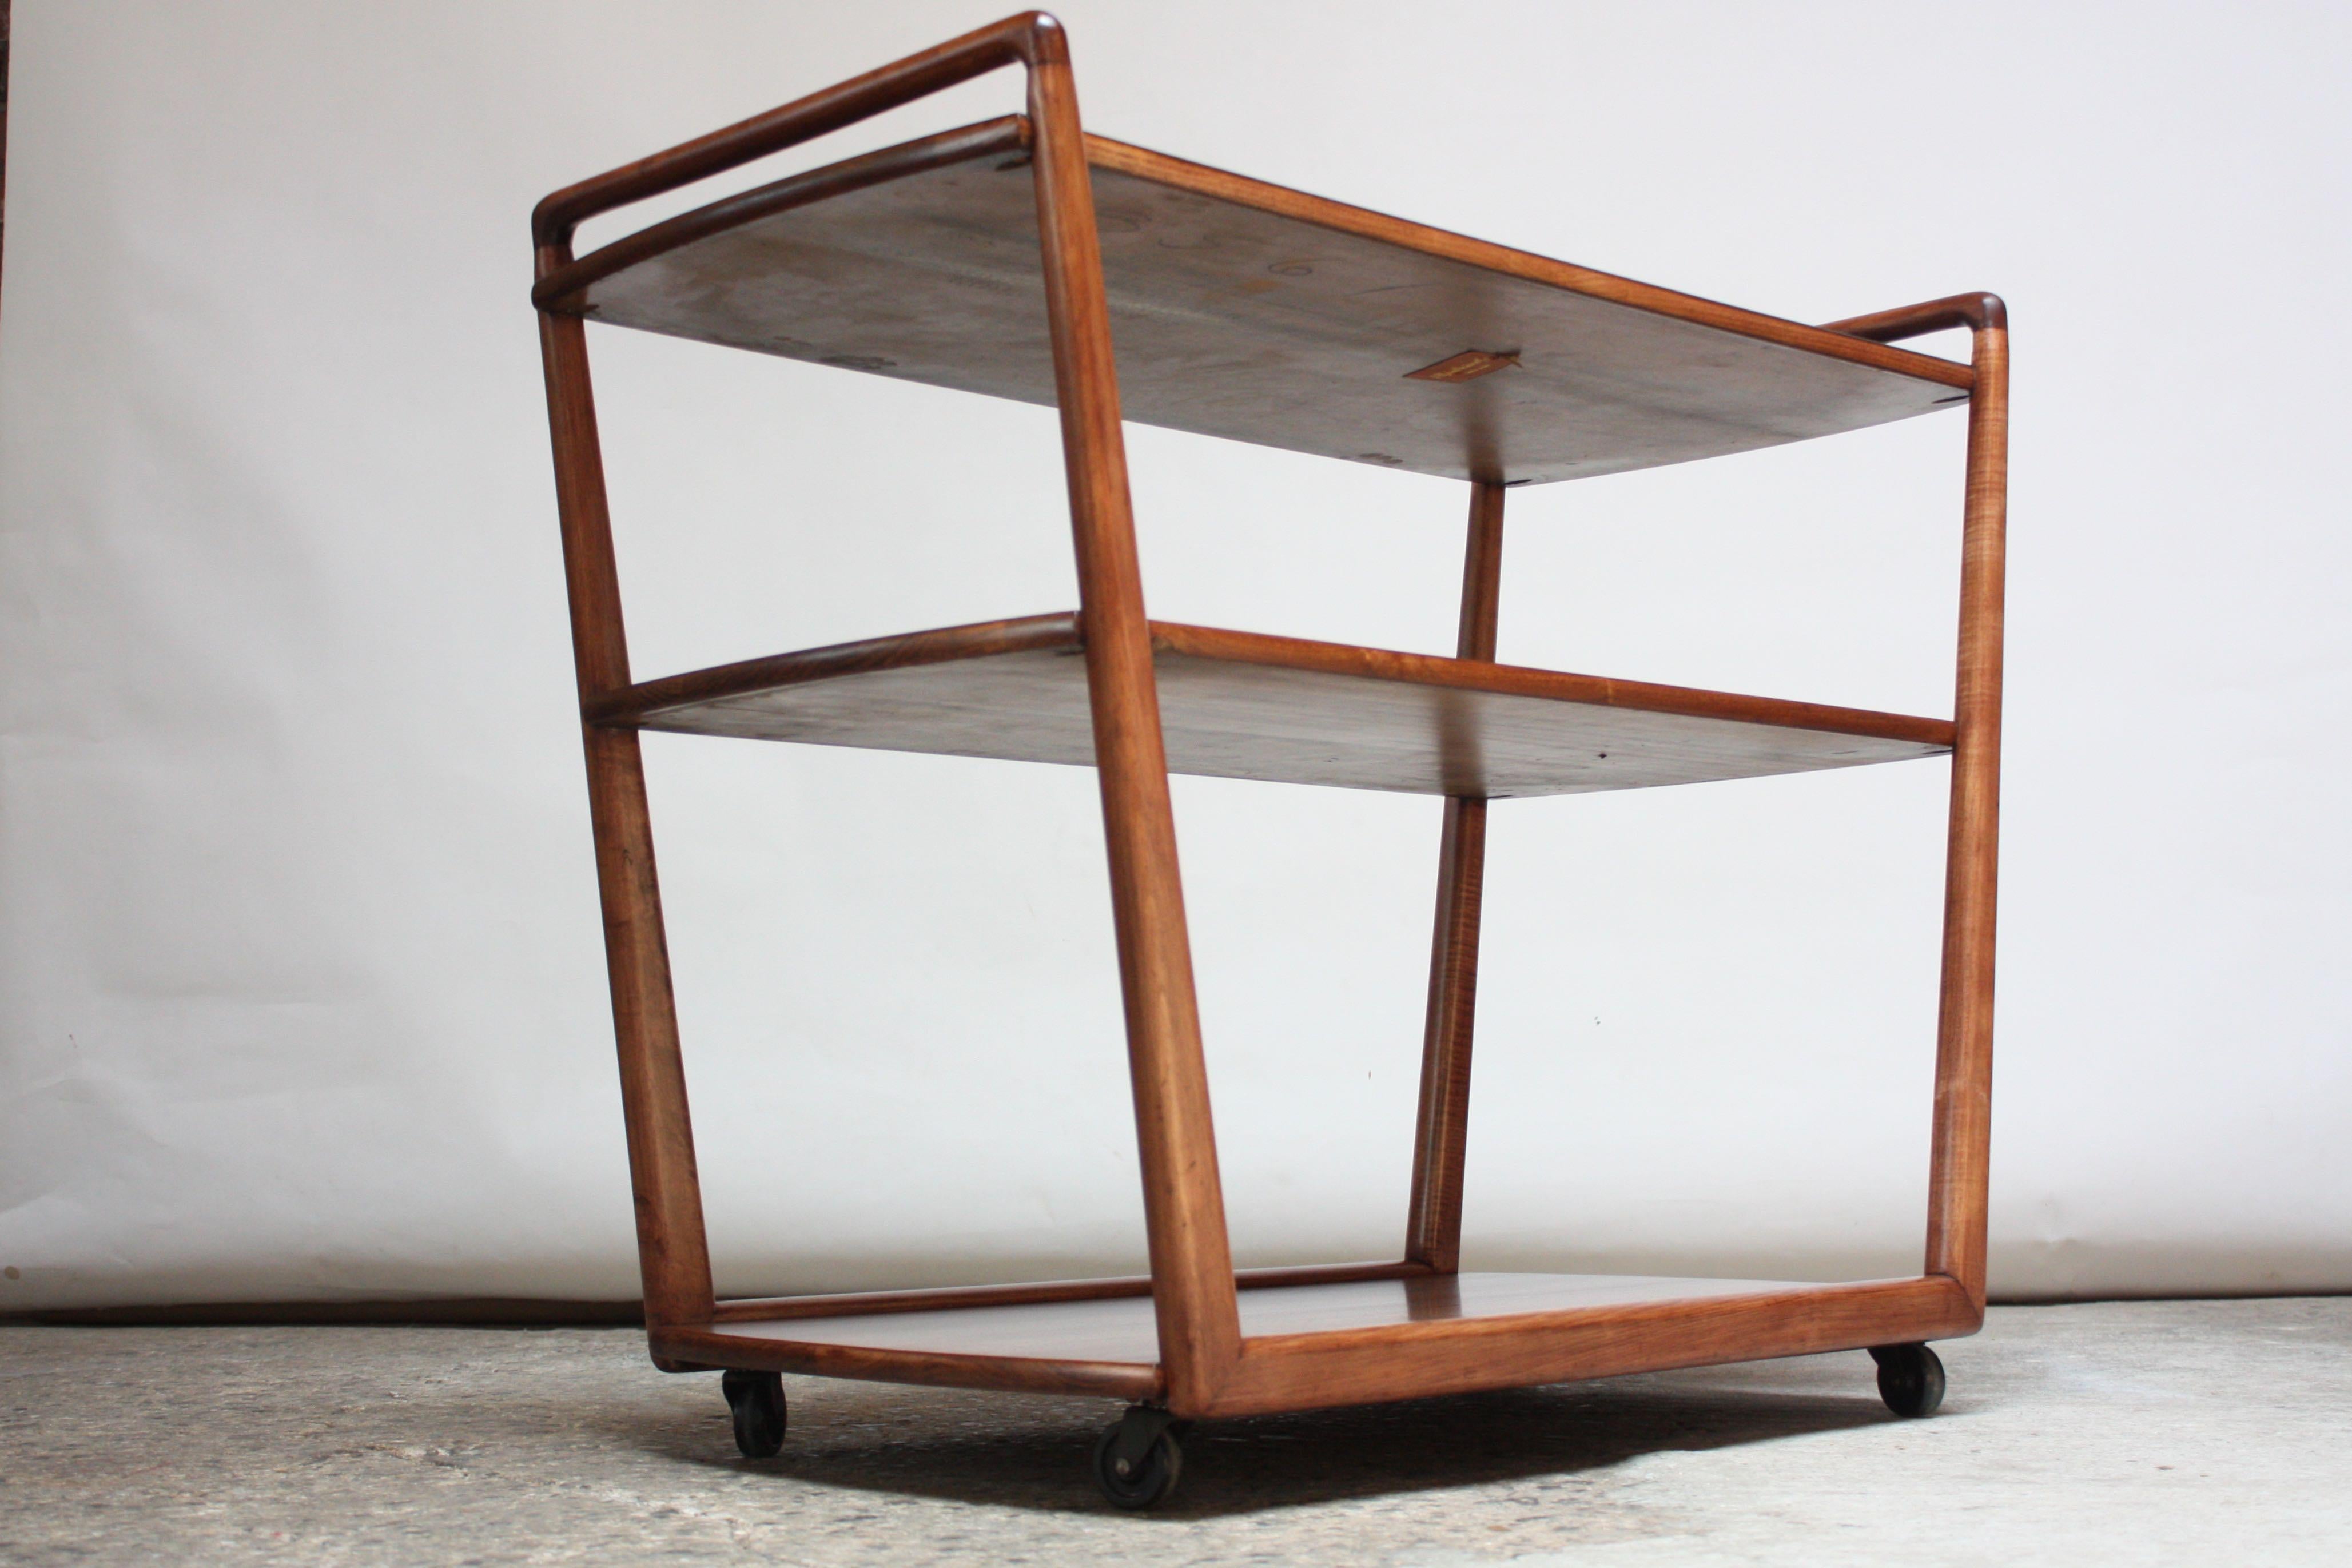 1950s three-tier sculpted walnut bar cart / serving trolley on caster wheels with a black laminated top shelf manufactured by the J. B. Van Sciver Co. of Camden, New Jersey (1881-1984). Nice, refinished condition with some light scratches to the